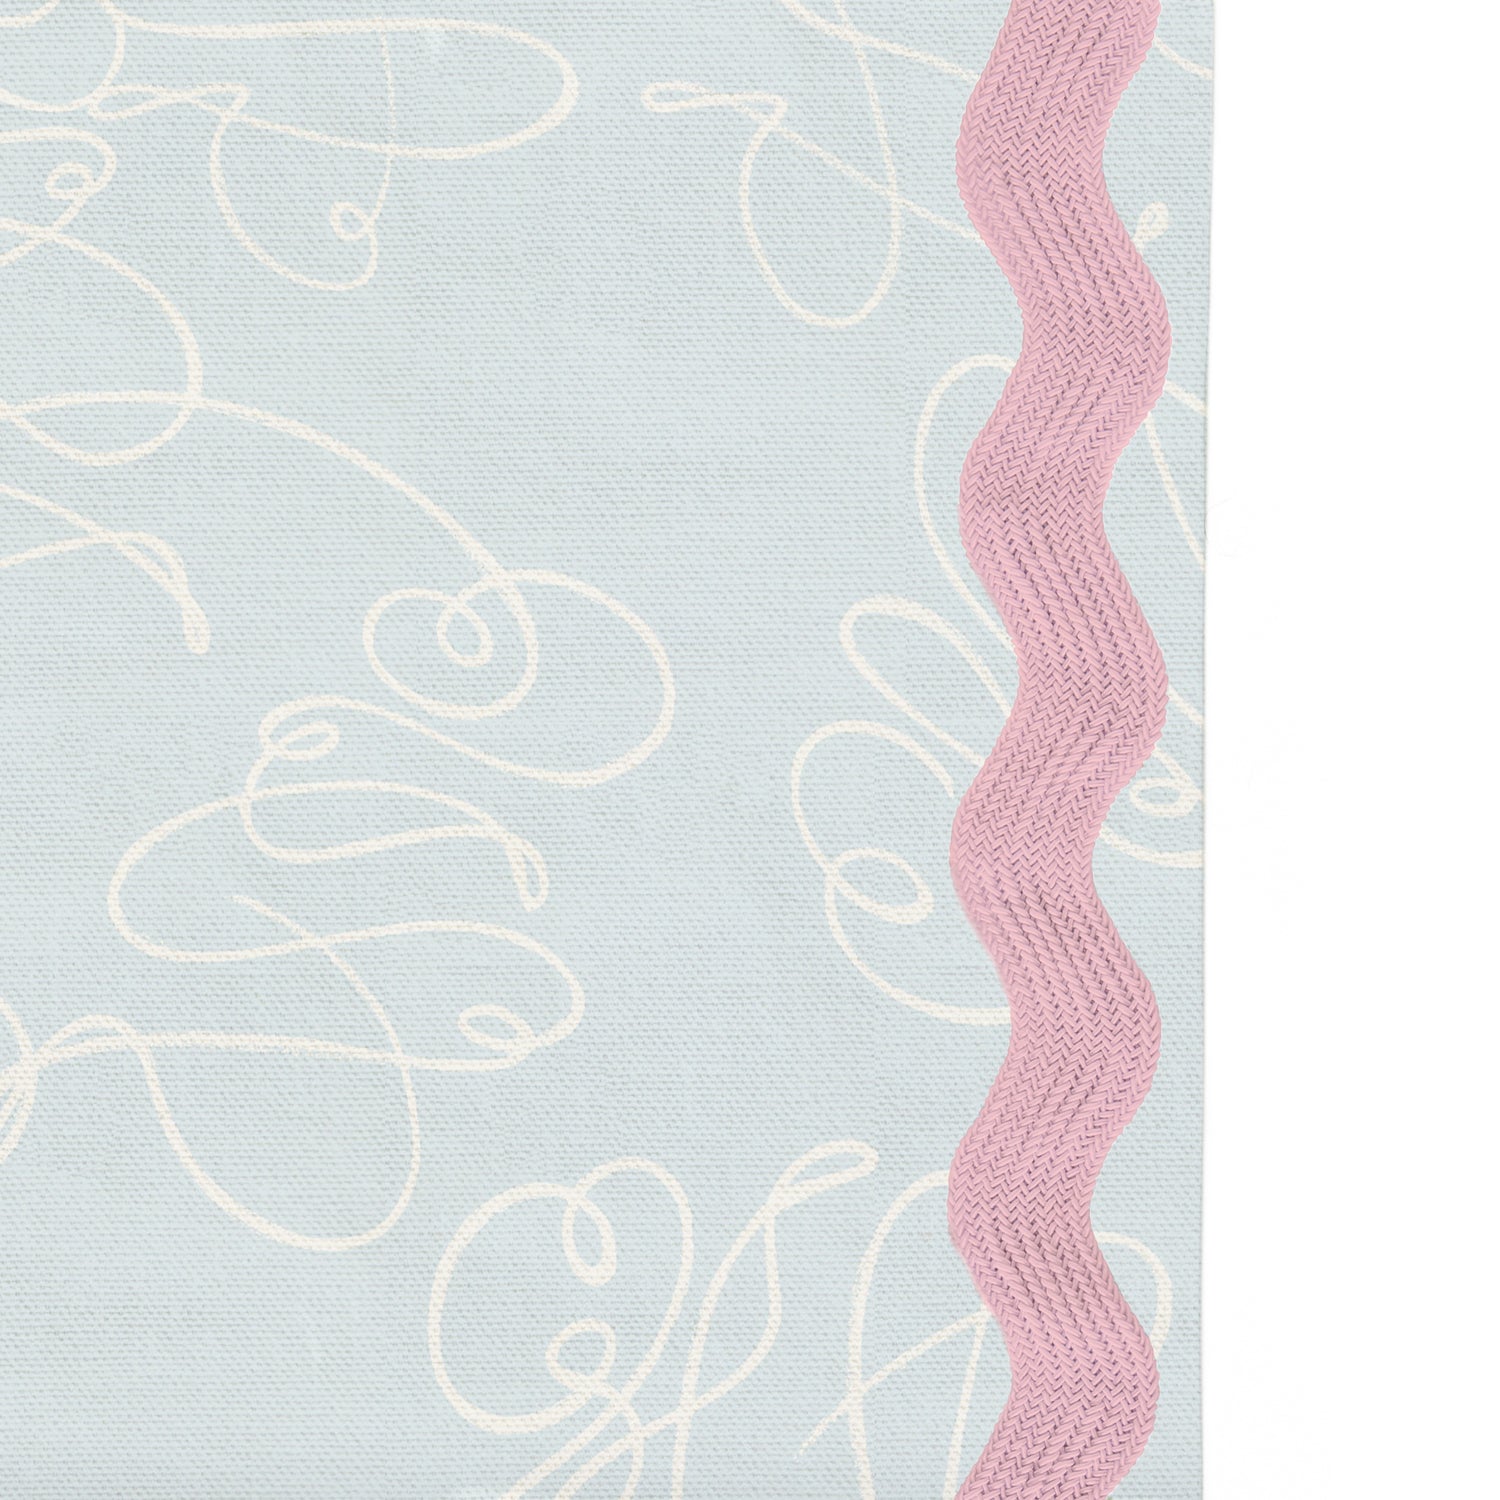 Upclose picture of Mirabella custom Powder Blue Abstractshower curtain with peony rick rack trim